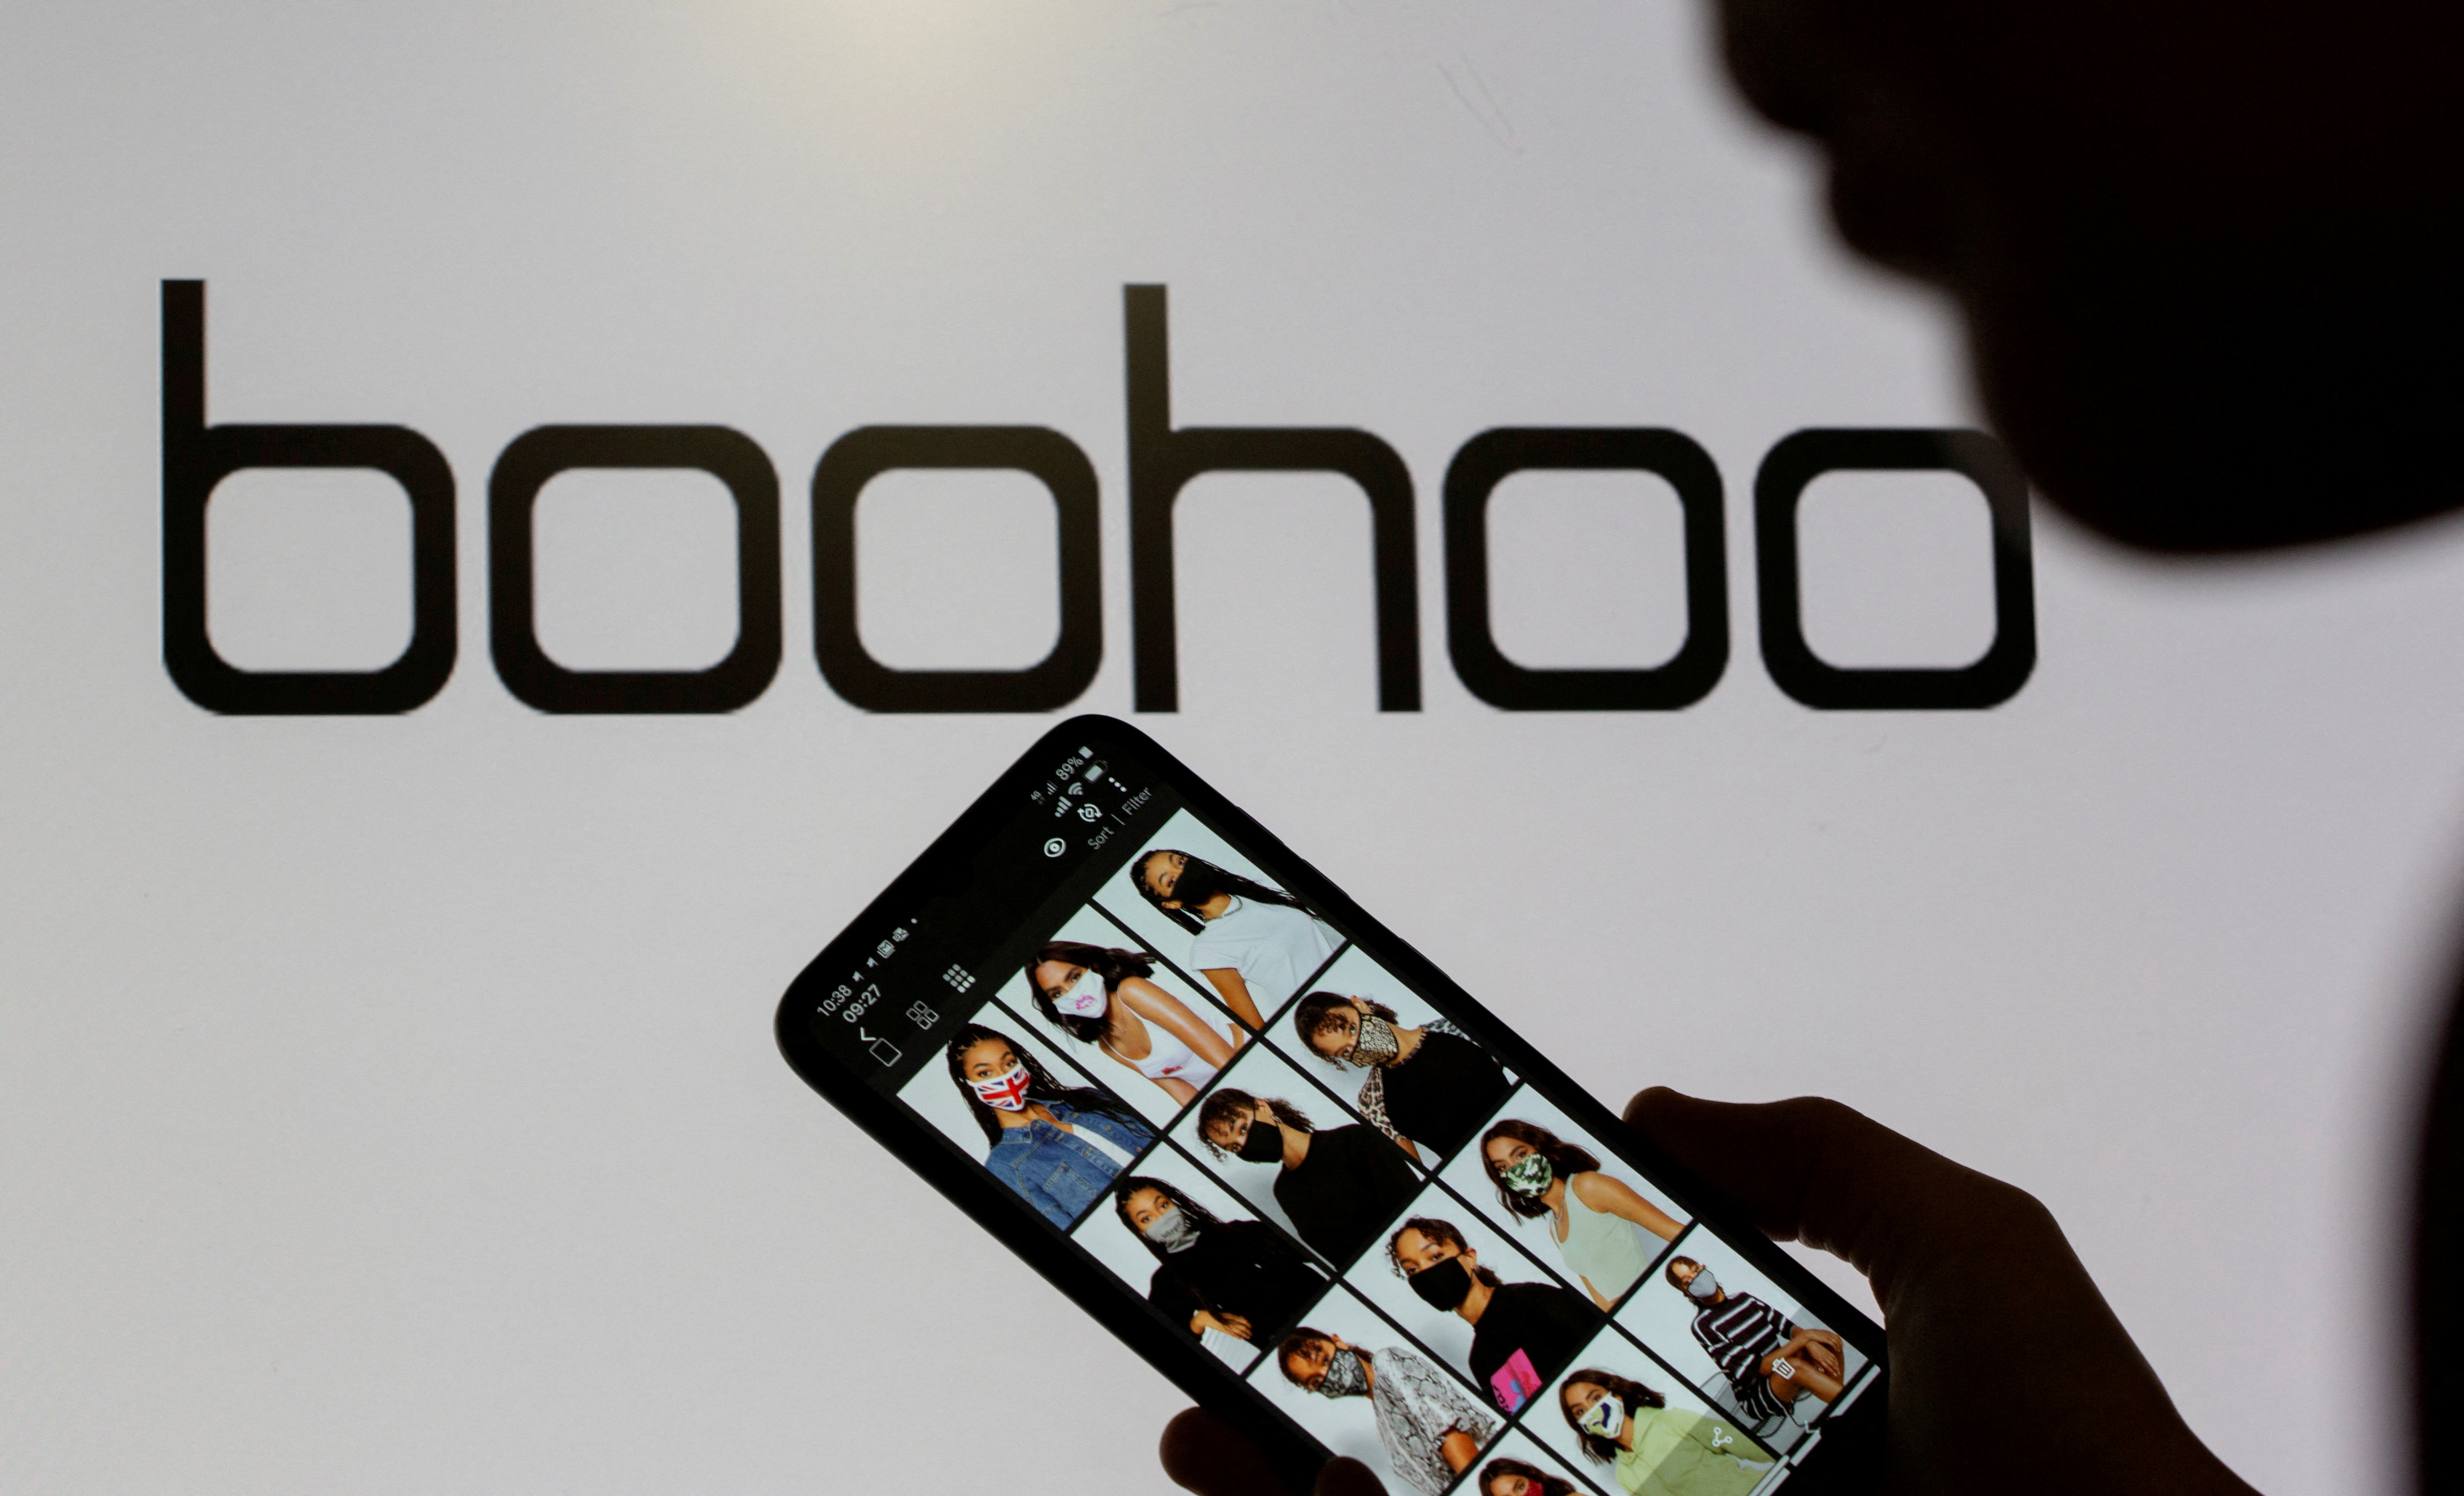 A woman poses with a smartphone showing the Boohoo app in front of the Boohoo logo on display in this illustration